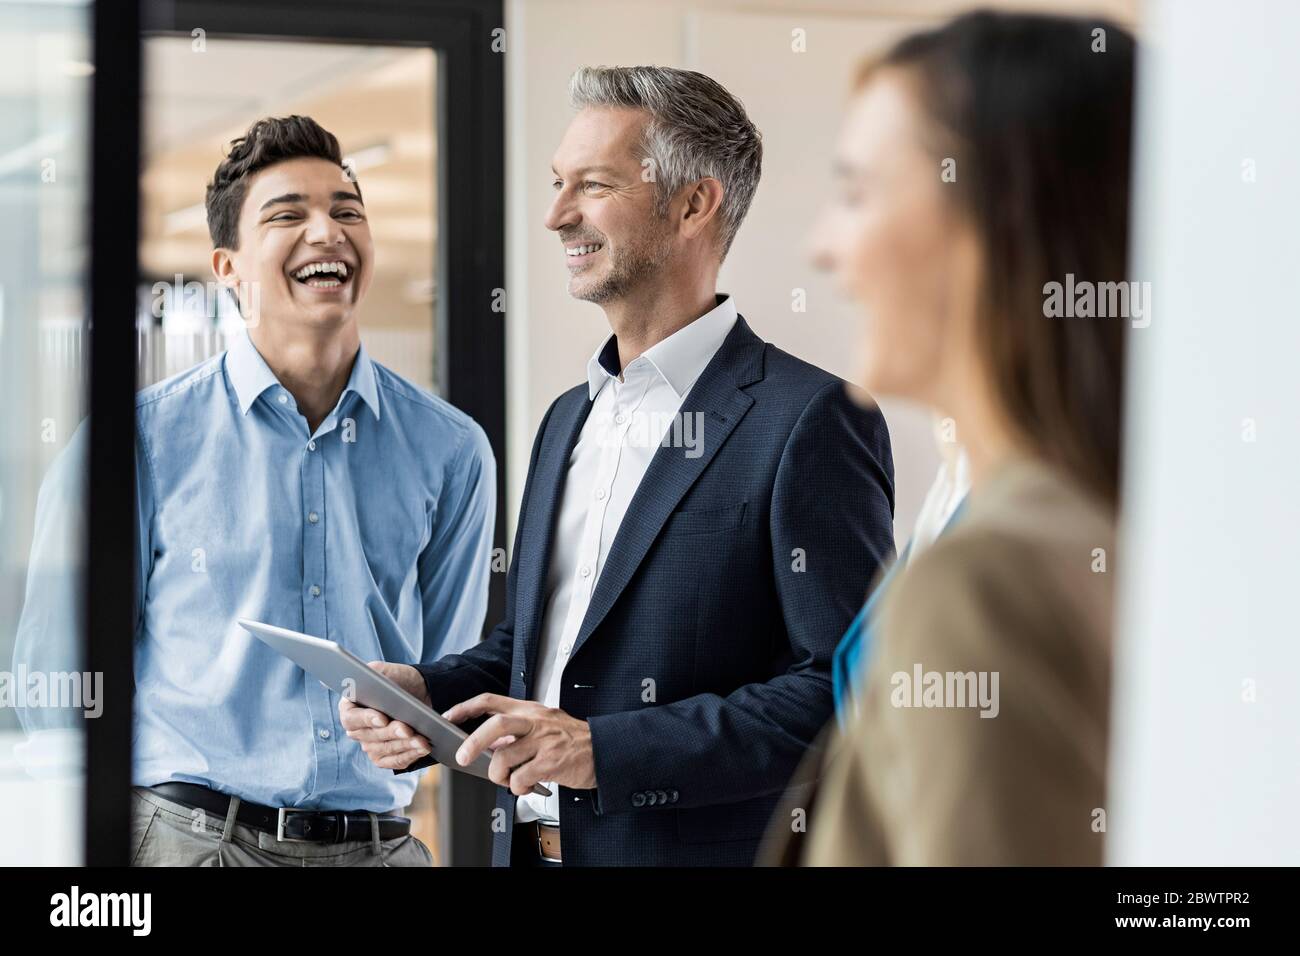 Smiling mature businessman and employees in office Stock Photo